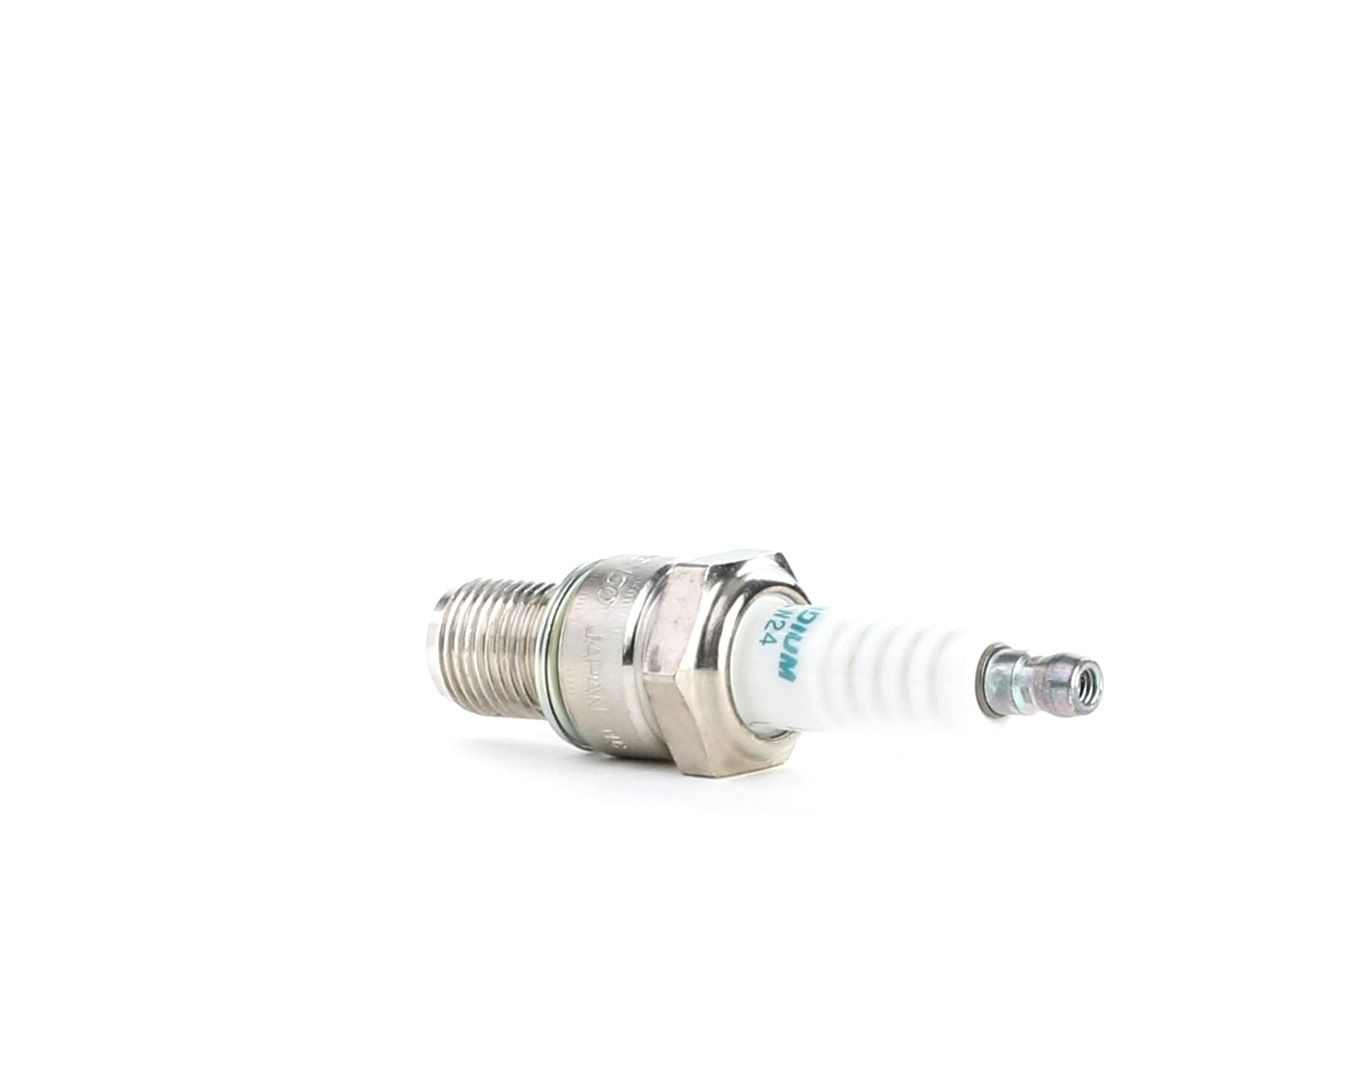 Maxi scooters Moped bike Motorcycle Spark Plug IW24